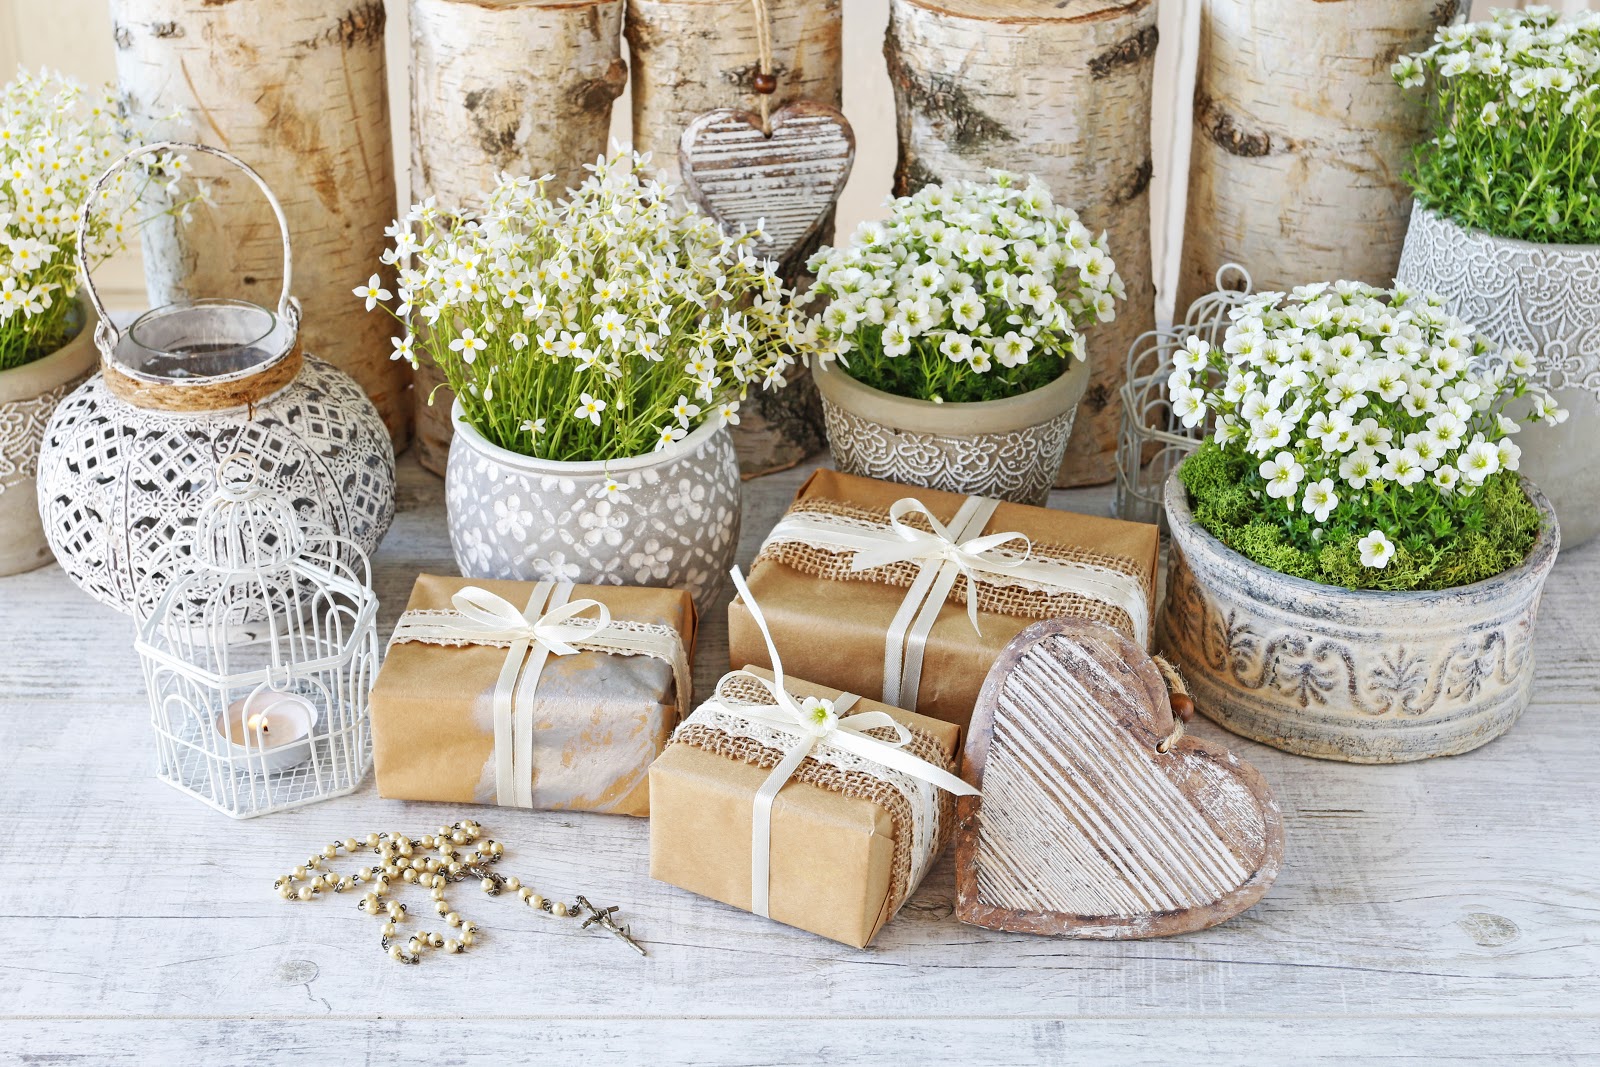 Wedding wishes: A table of wedding gifts and decorations